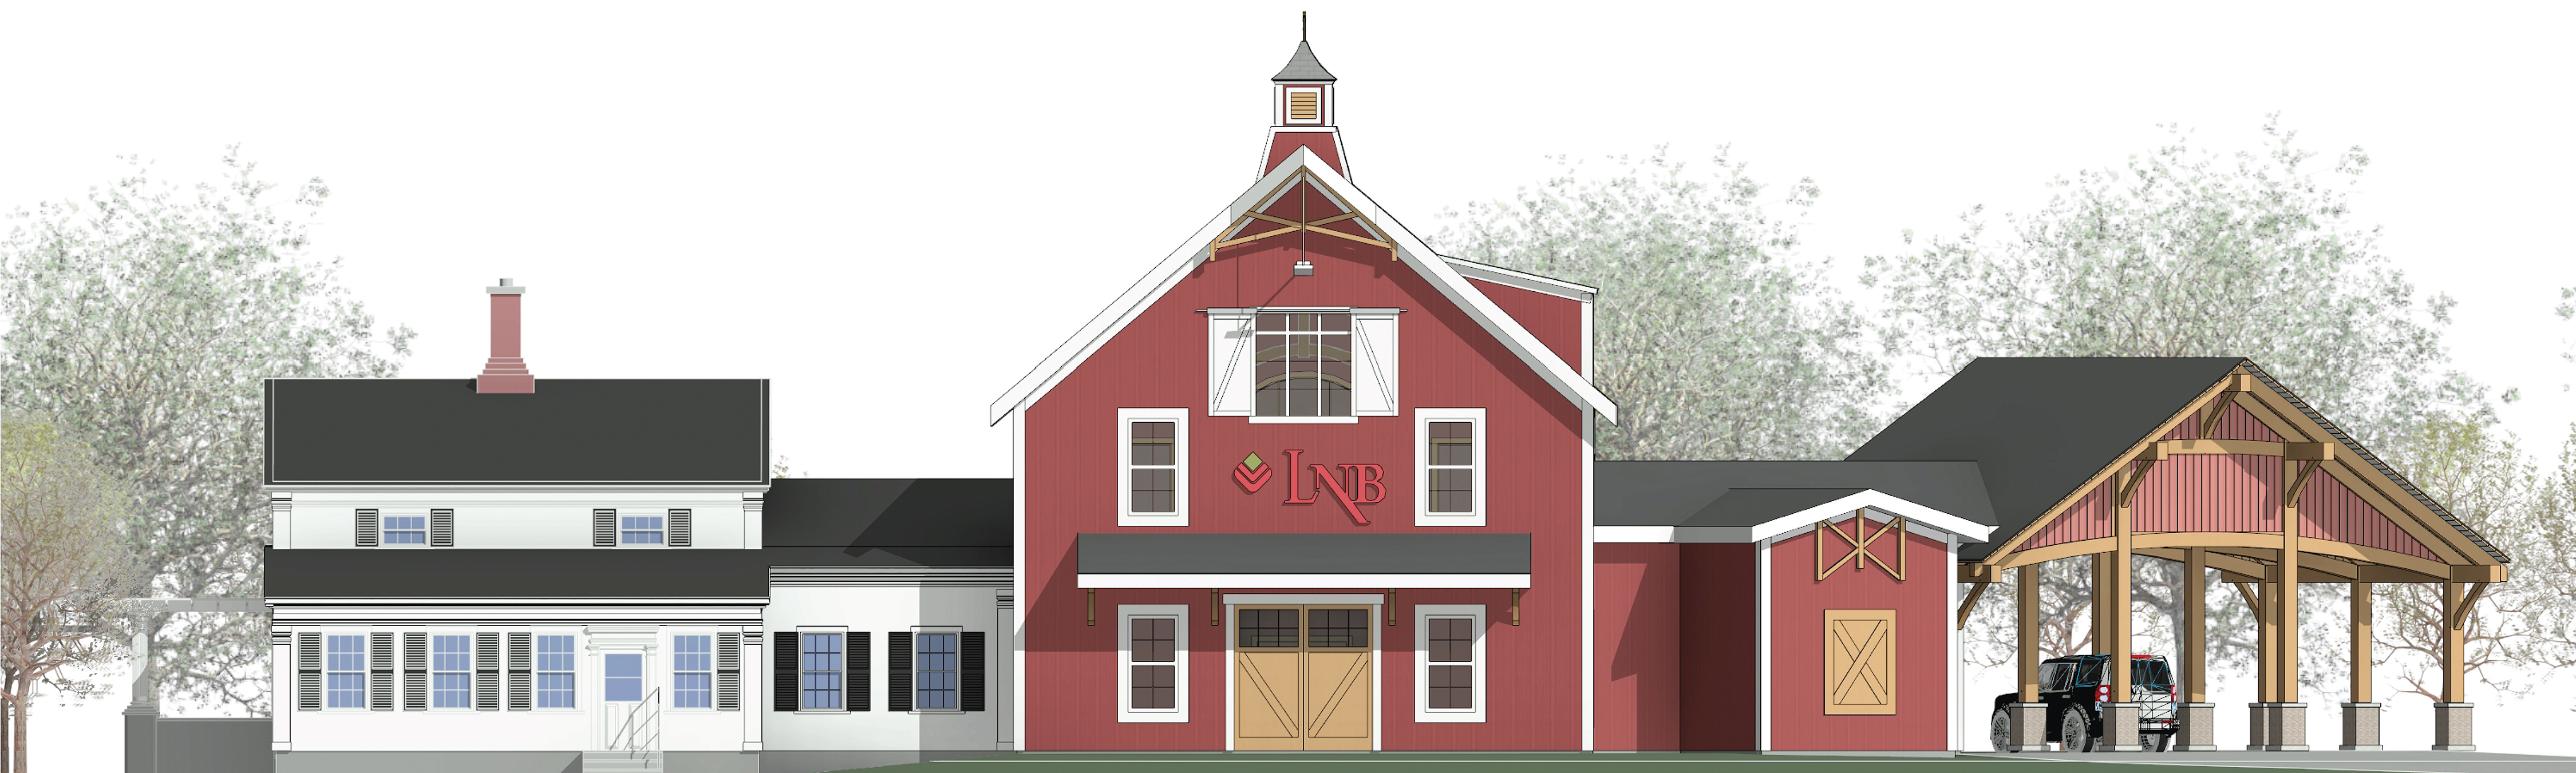 A rendering of new LNB's Farmington location, to open in Spring 2020.